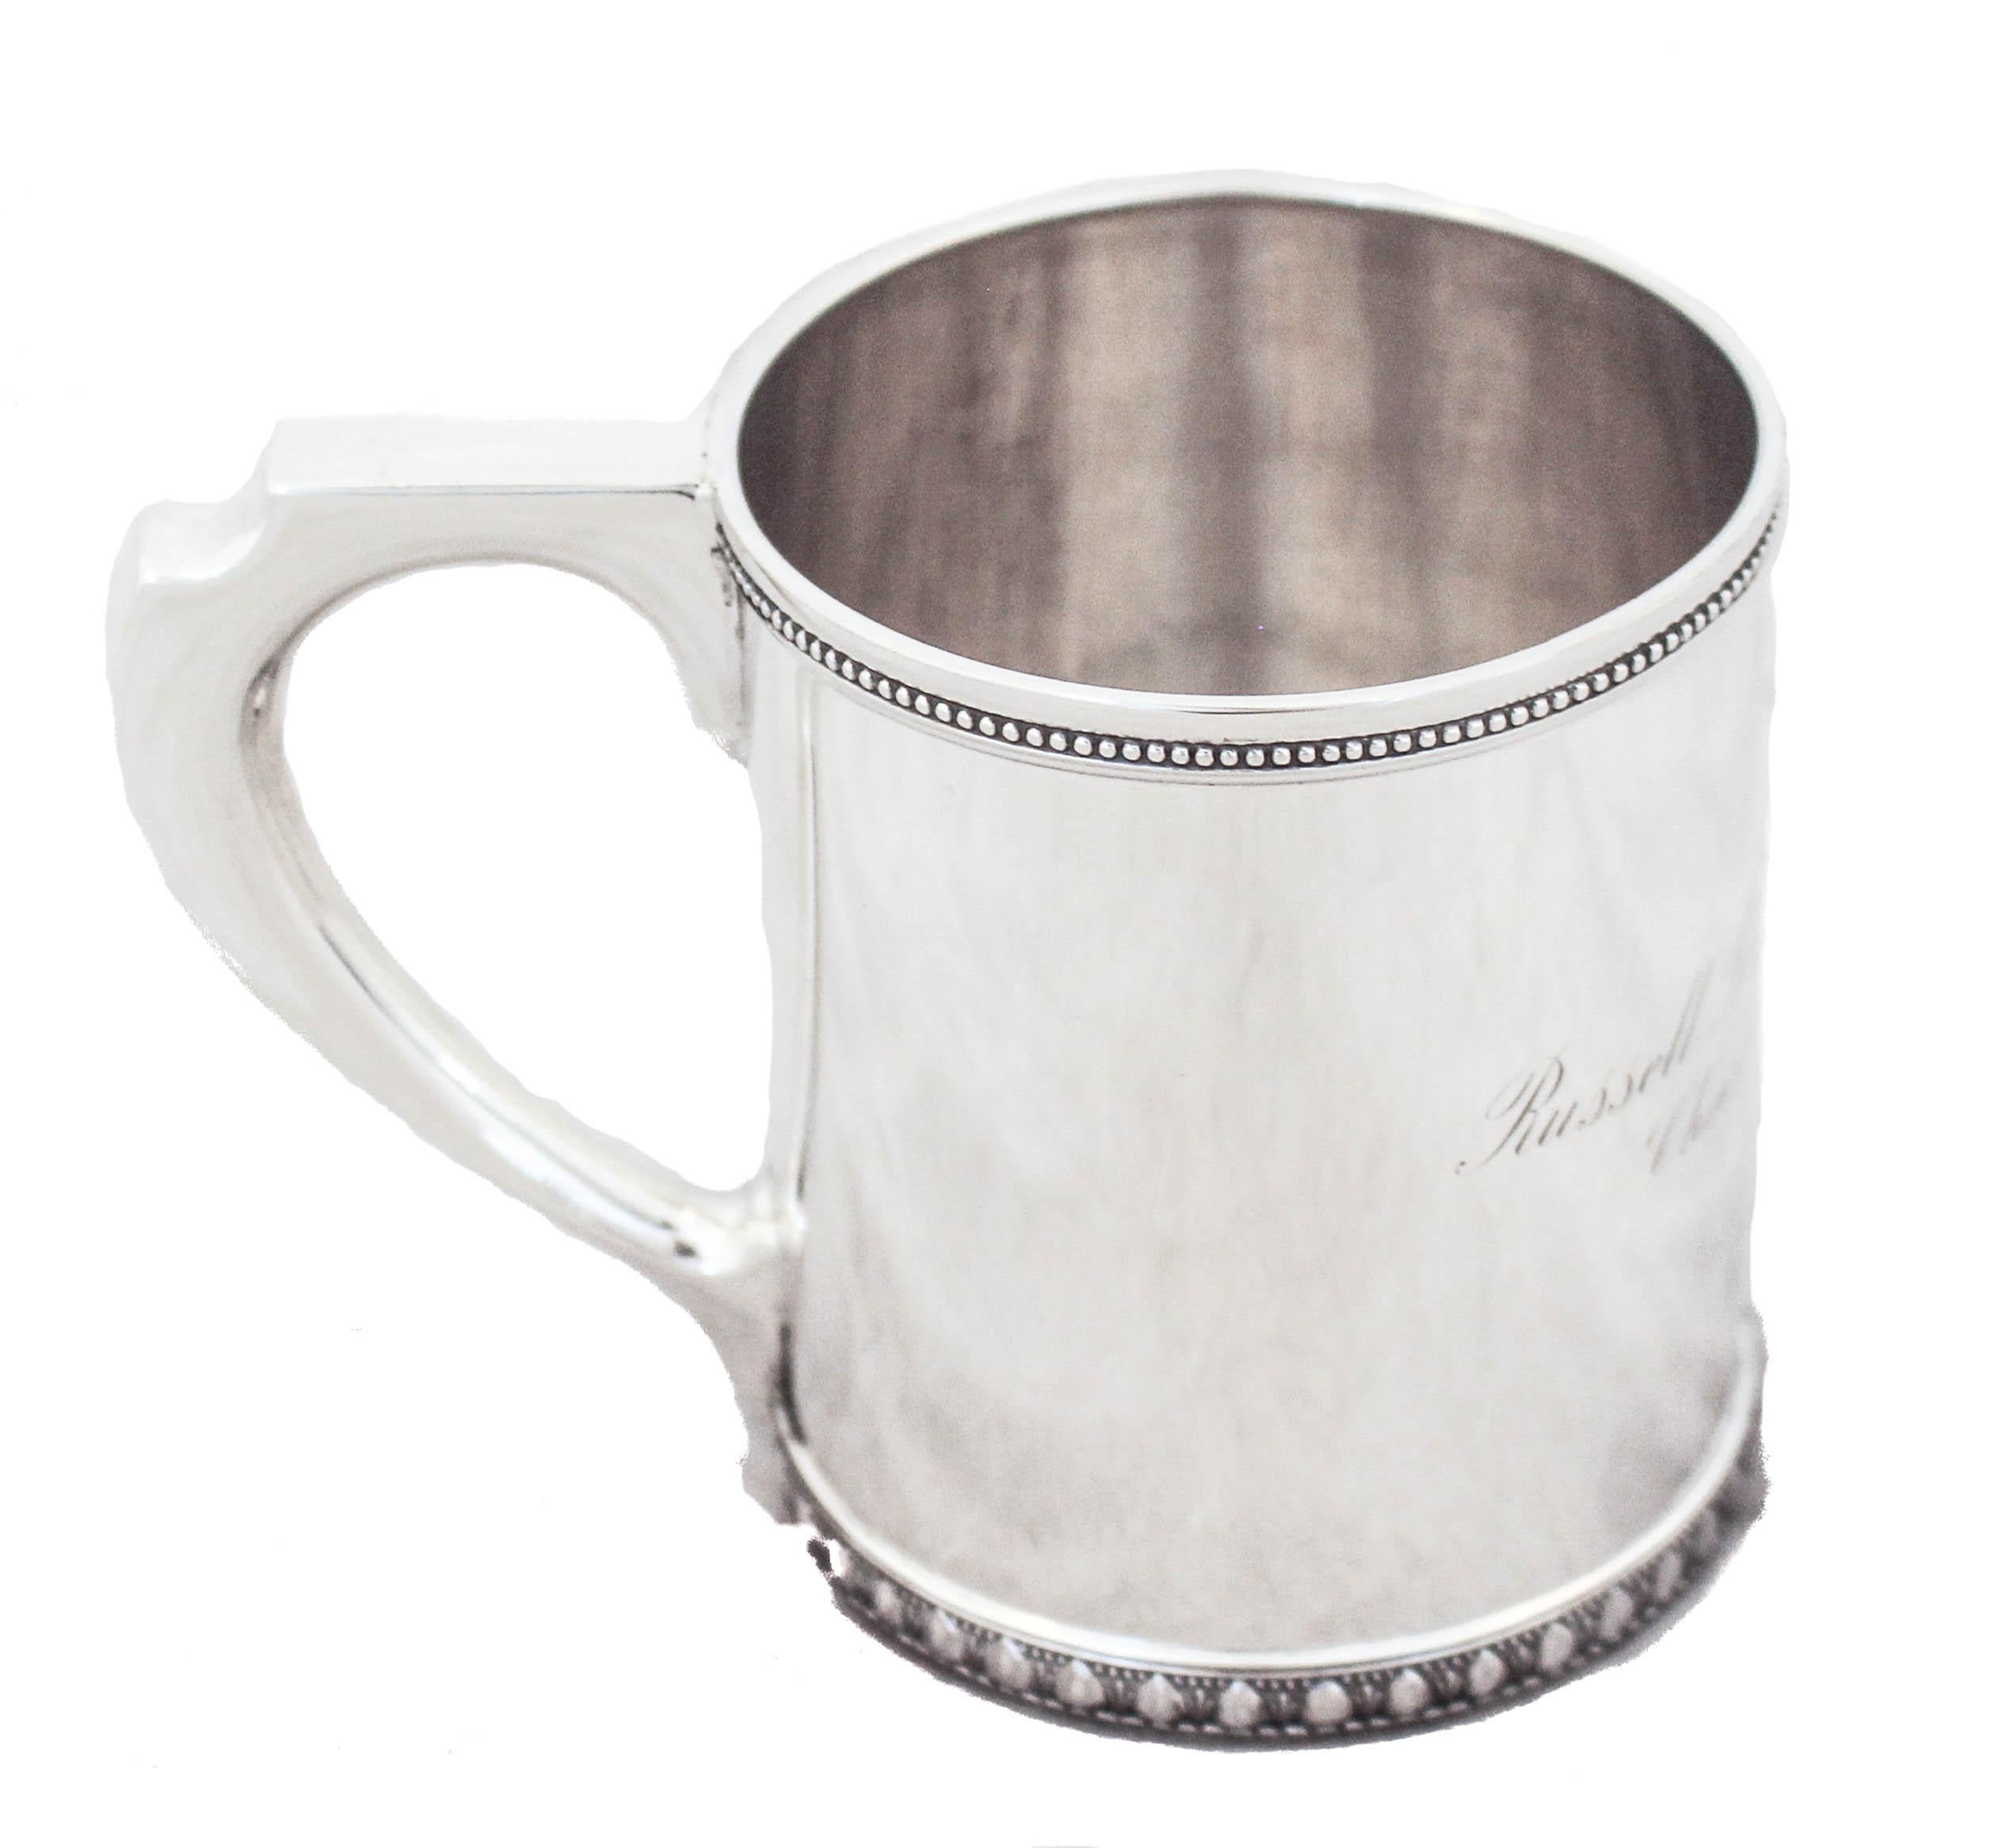 We are proud to offer you this sterling silver handled mug by the world renowned Tiffany & Company. It is 129 years old! Presented on Christmas 1894, it was made the year before. The hand engraved inscription reads:
”Russell Blaisdell